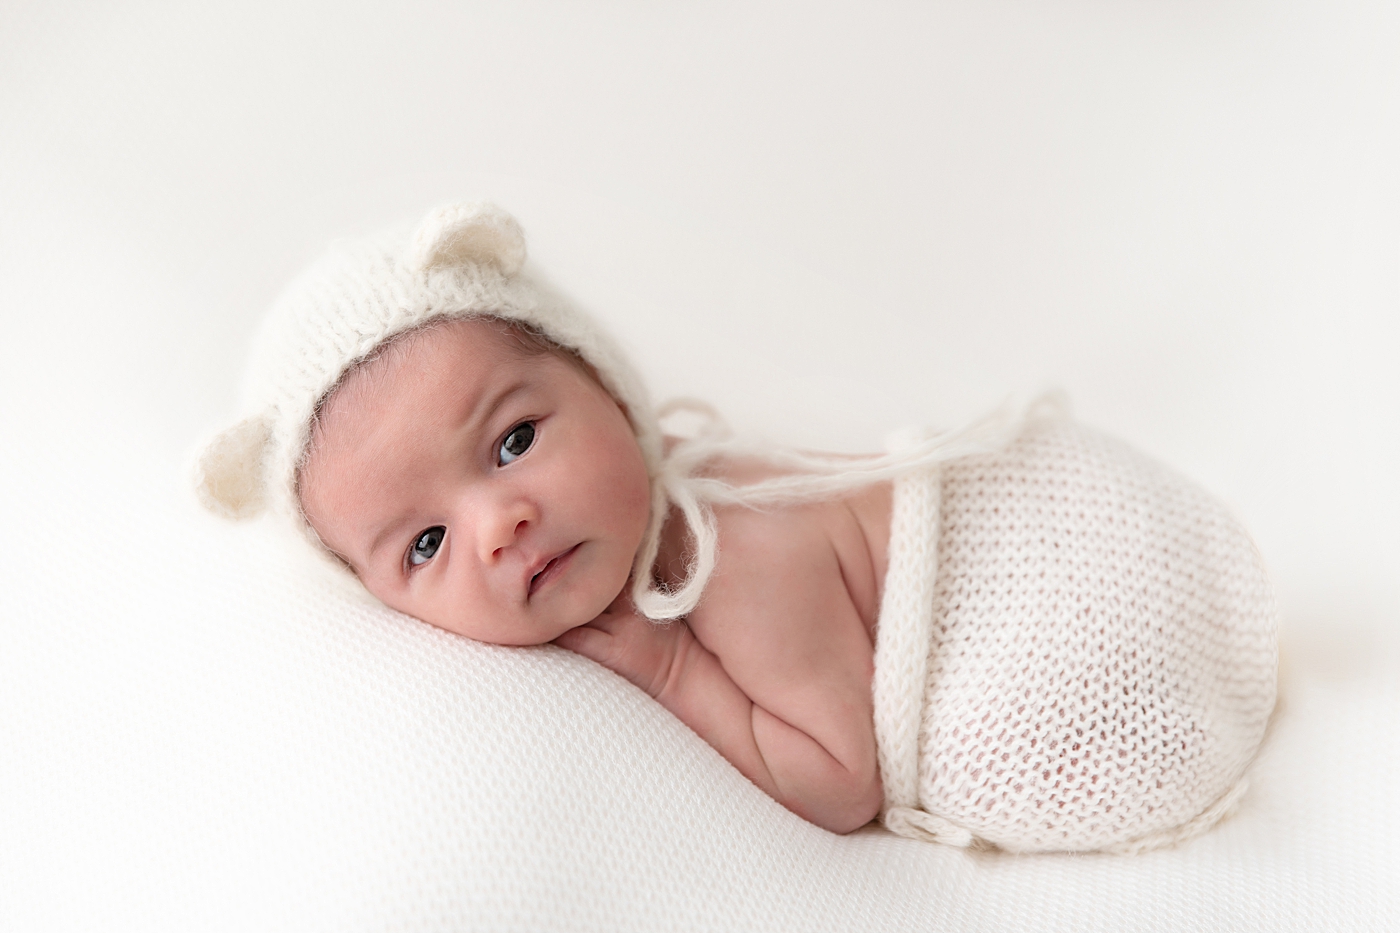 Baby boy snuggled up for his newborn photos. Photo by Rachel Brookes Photography.